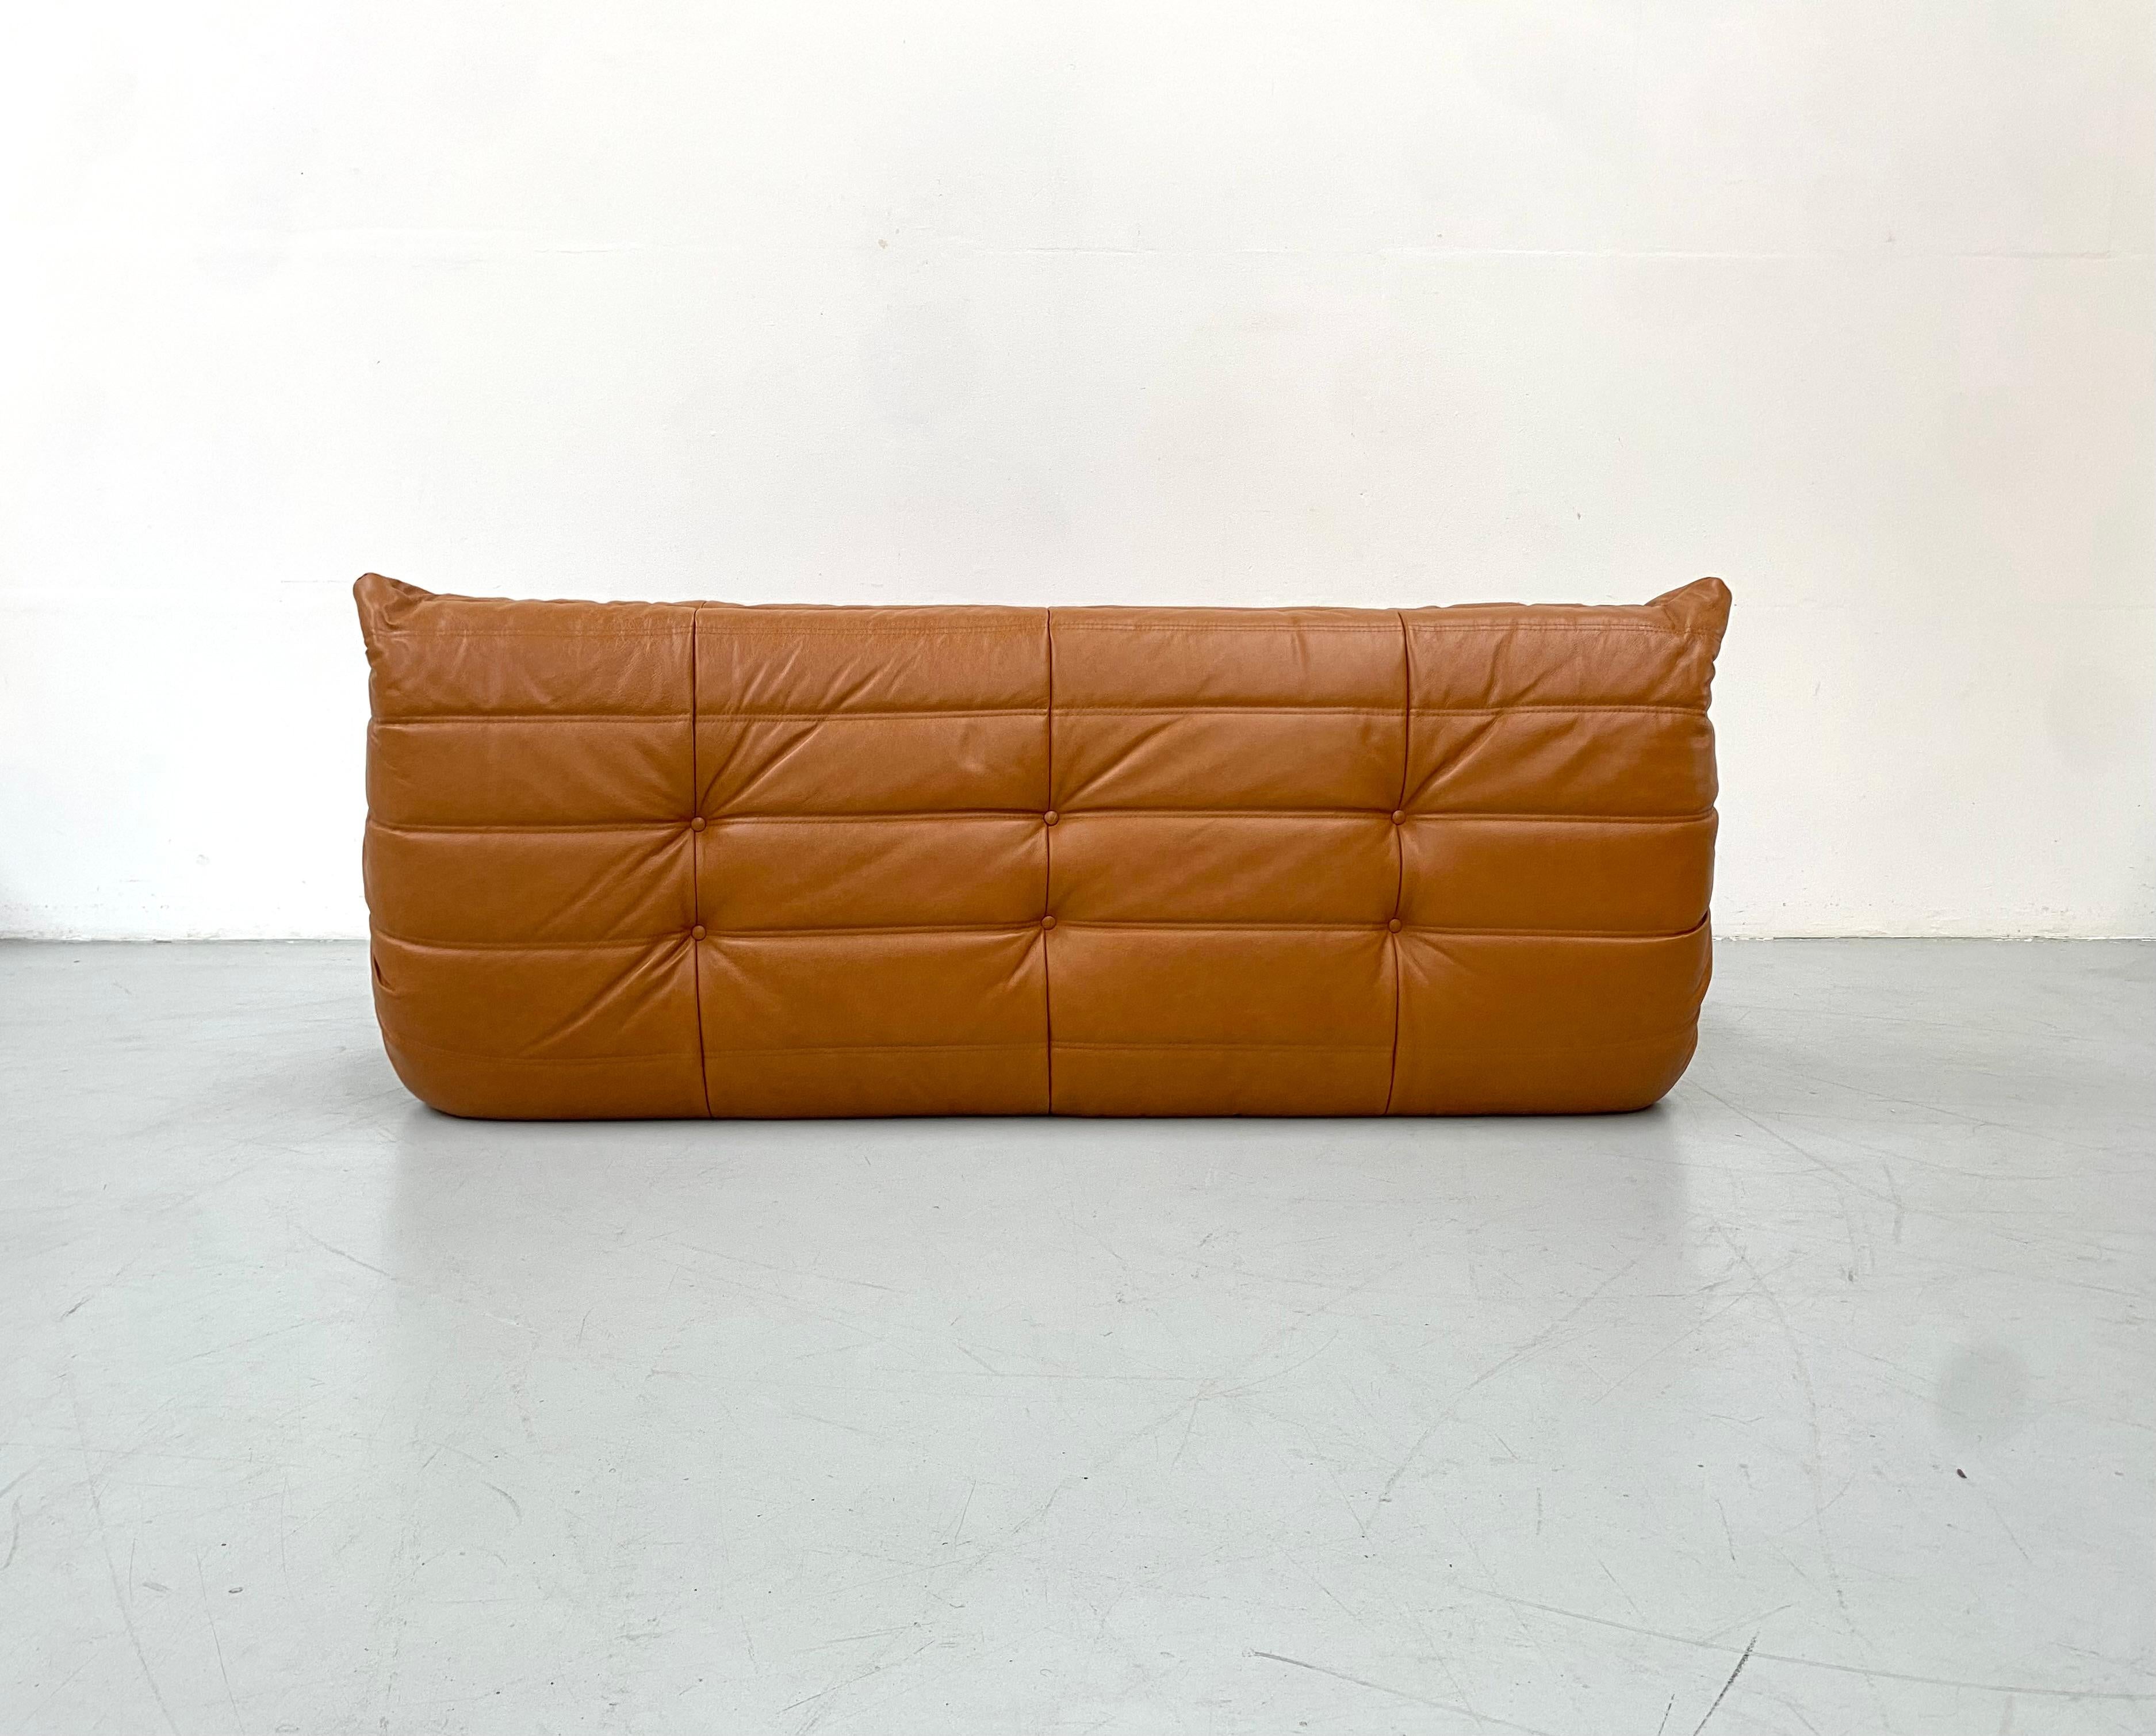 20th Century French Vintage Togo Sofa in Brown Leather by Michel Ducaroy for Ligne Roset.